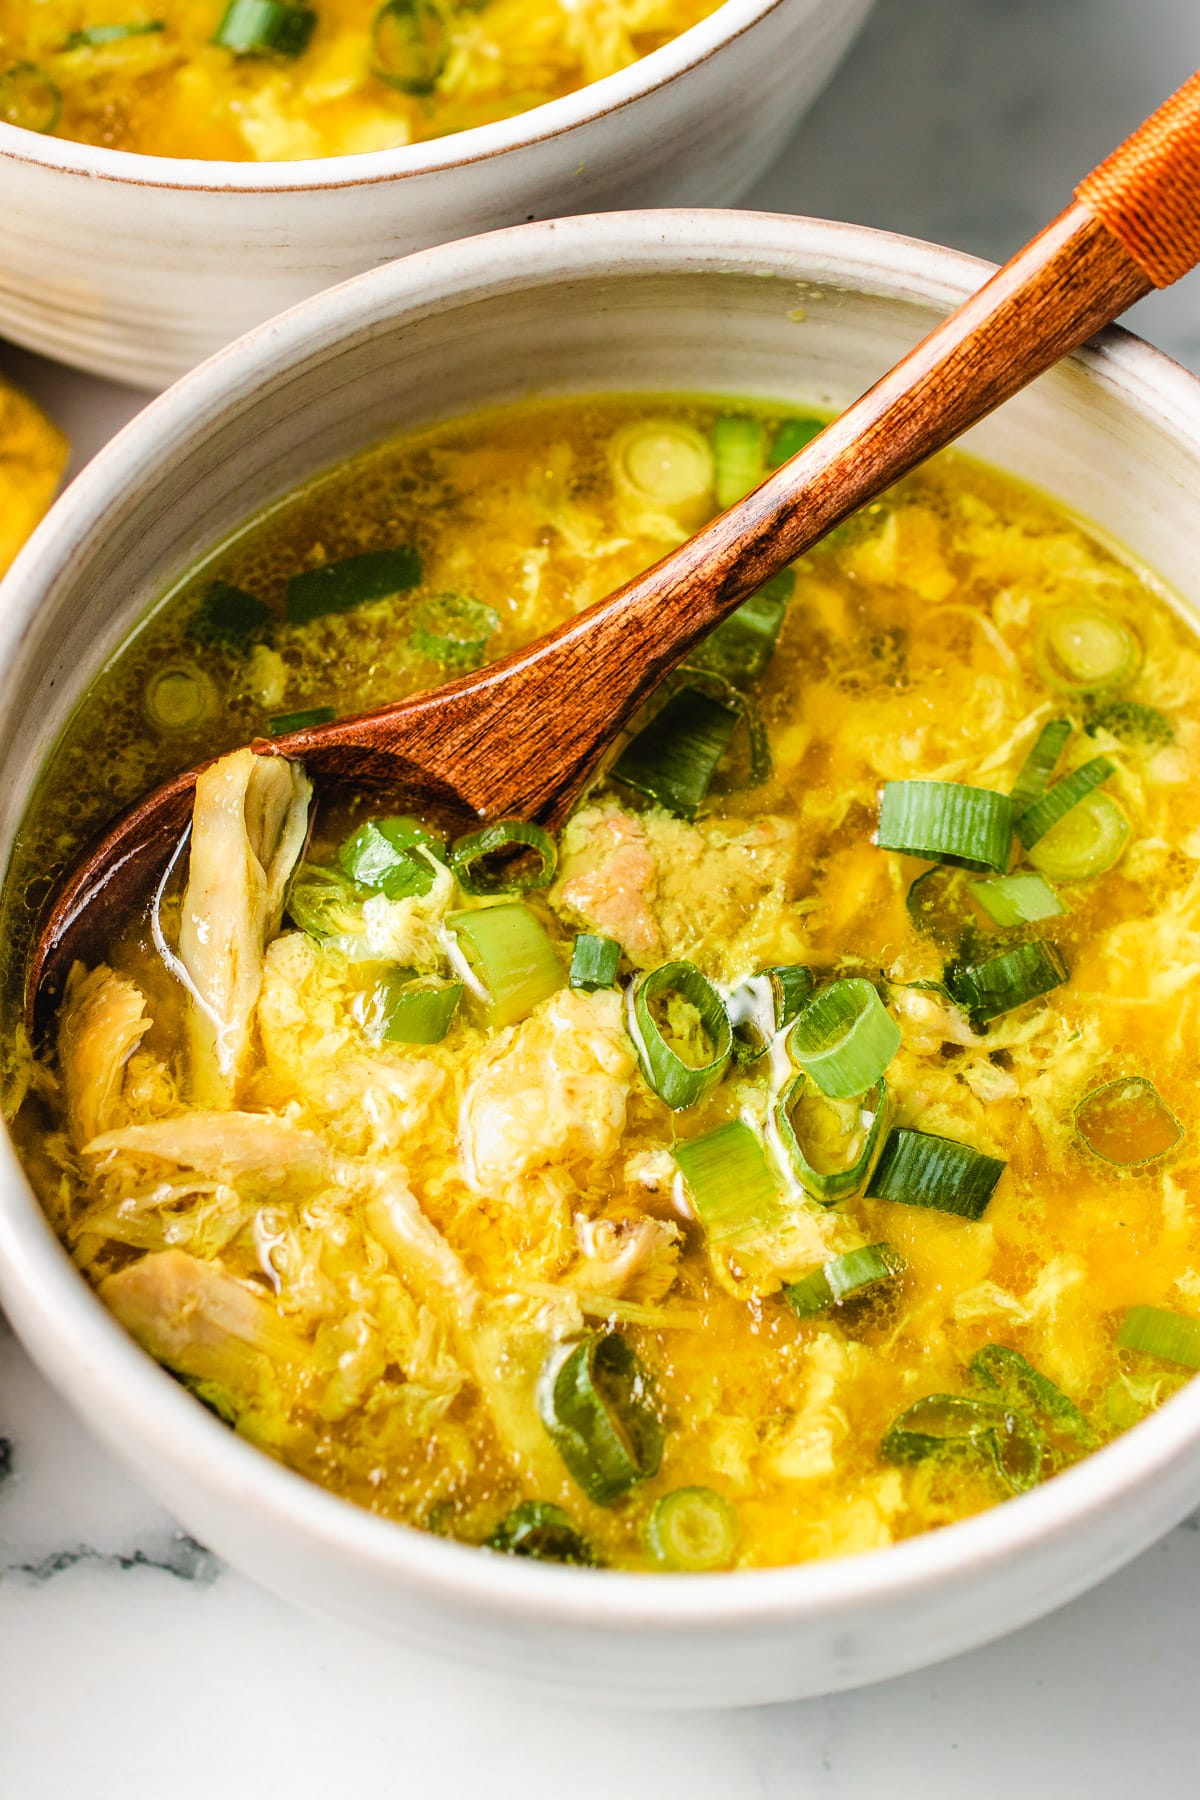 Image shows a white serving bowl with low carb egg drop soup with chicken served in the bowl with a spoon.